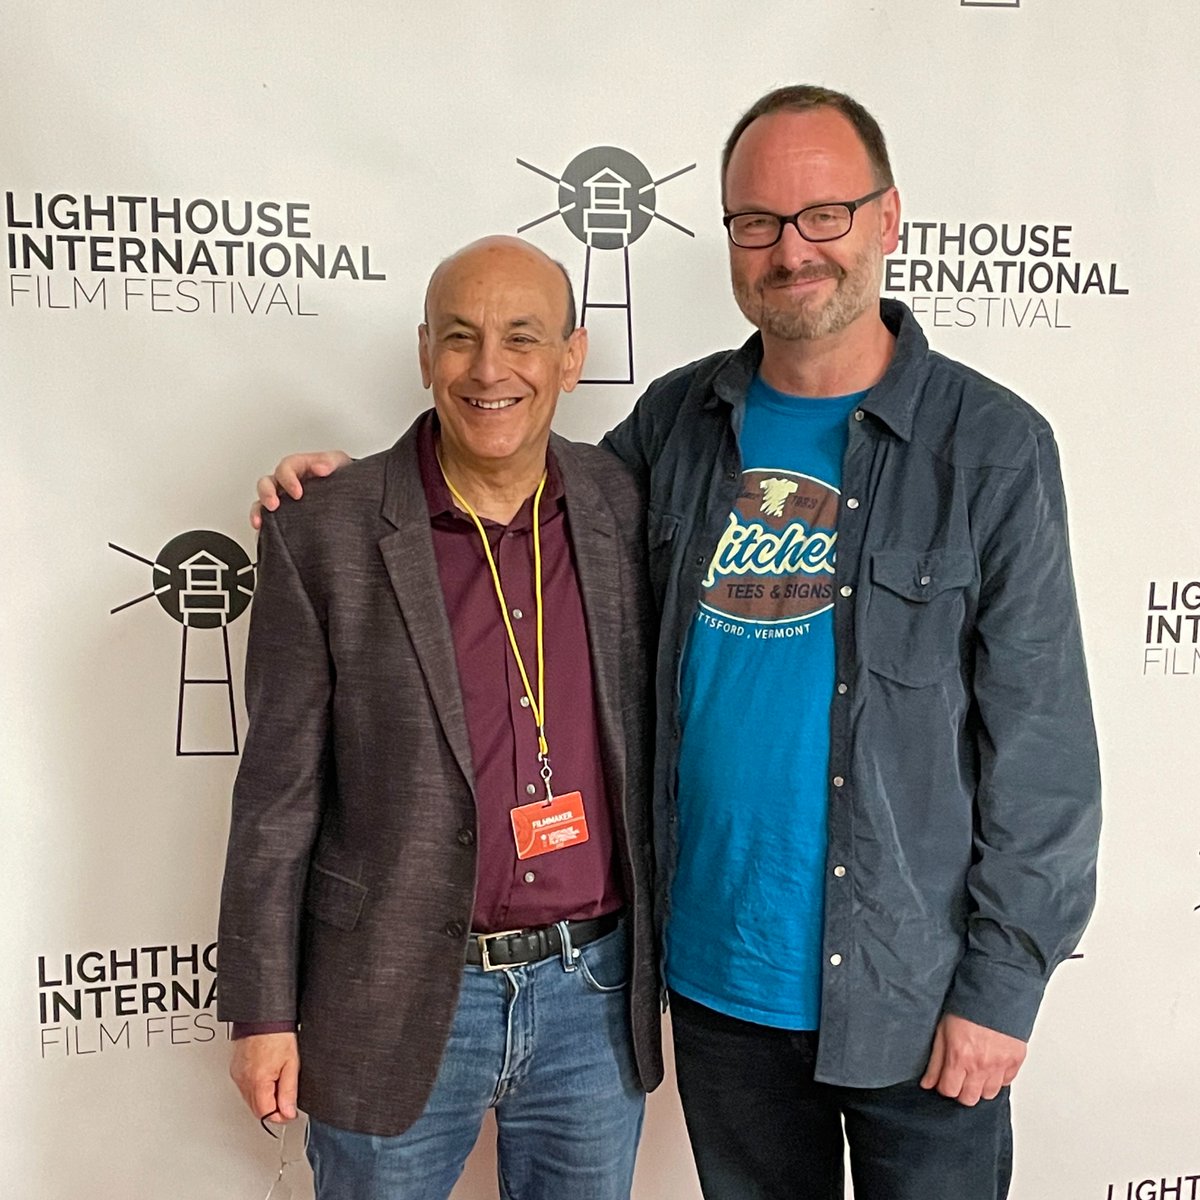 Amazing time @LighthouseFilm w collaborator @stevelichtenste and our new short comedy drama AARON WITH TWO A'S! Thanks so much for having us! Stay tuned for more festival news! #aaronwithtwoas #comedy #drama #dramedy #shortfilm #liff2022